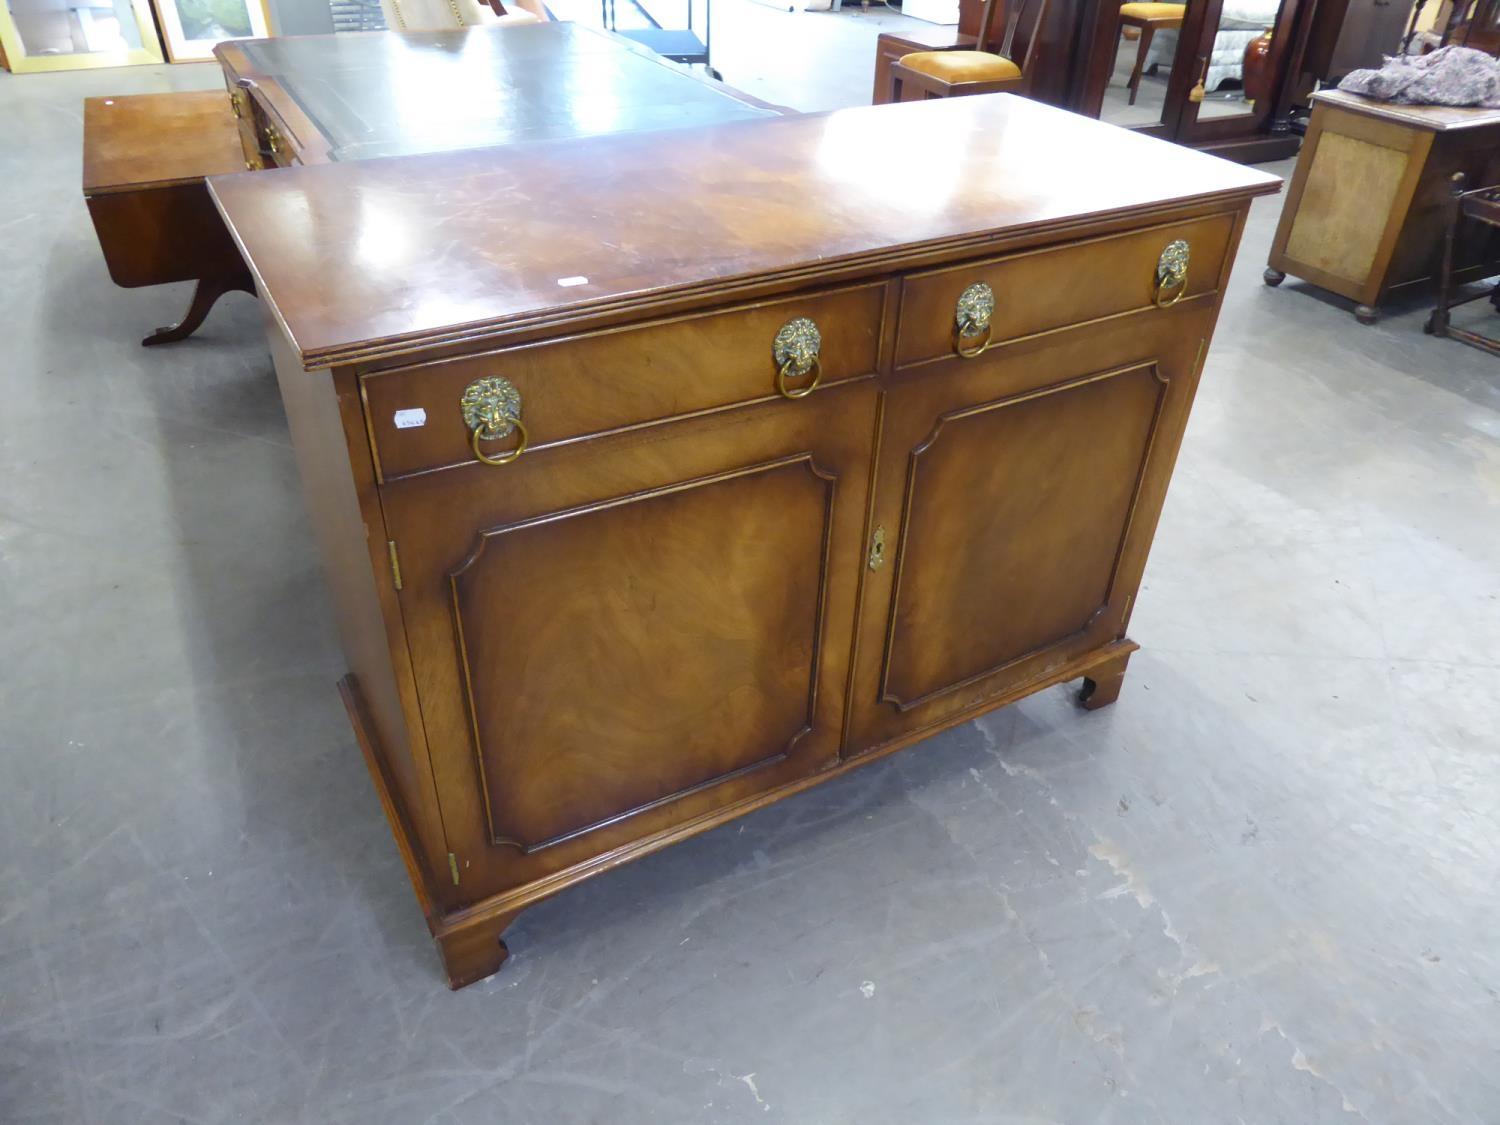 *BEVAN FUNNELL REGENCY STYLE MAHOGANY SIDE CABINET, THE TWO DOORS EACH FACED AS A FALSE DRAWER